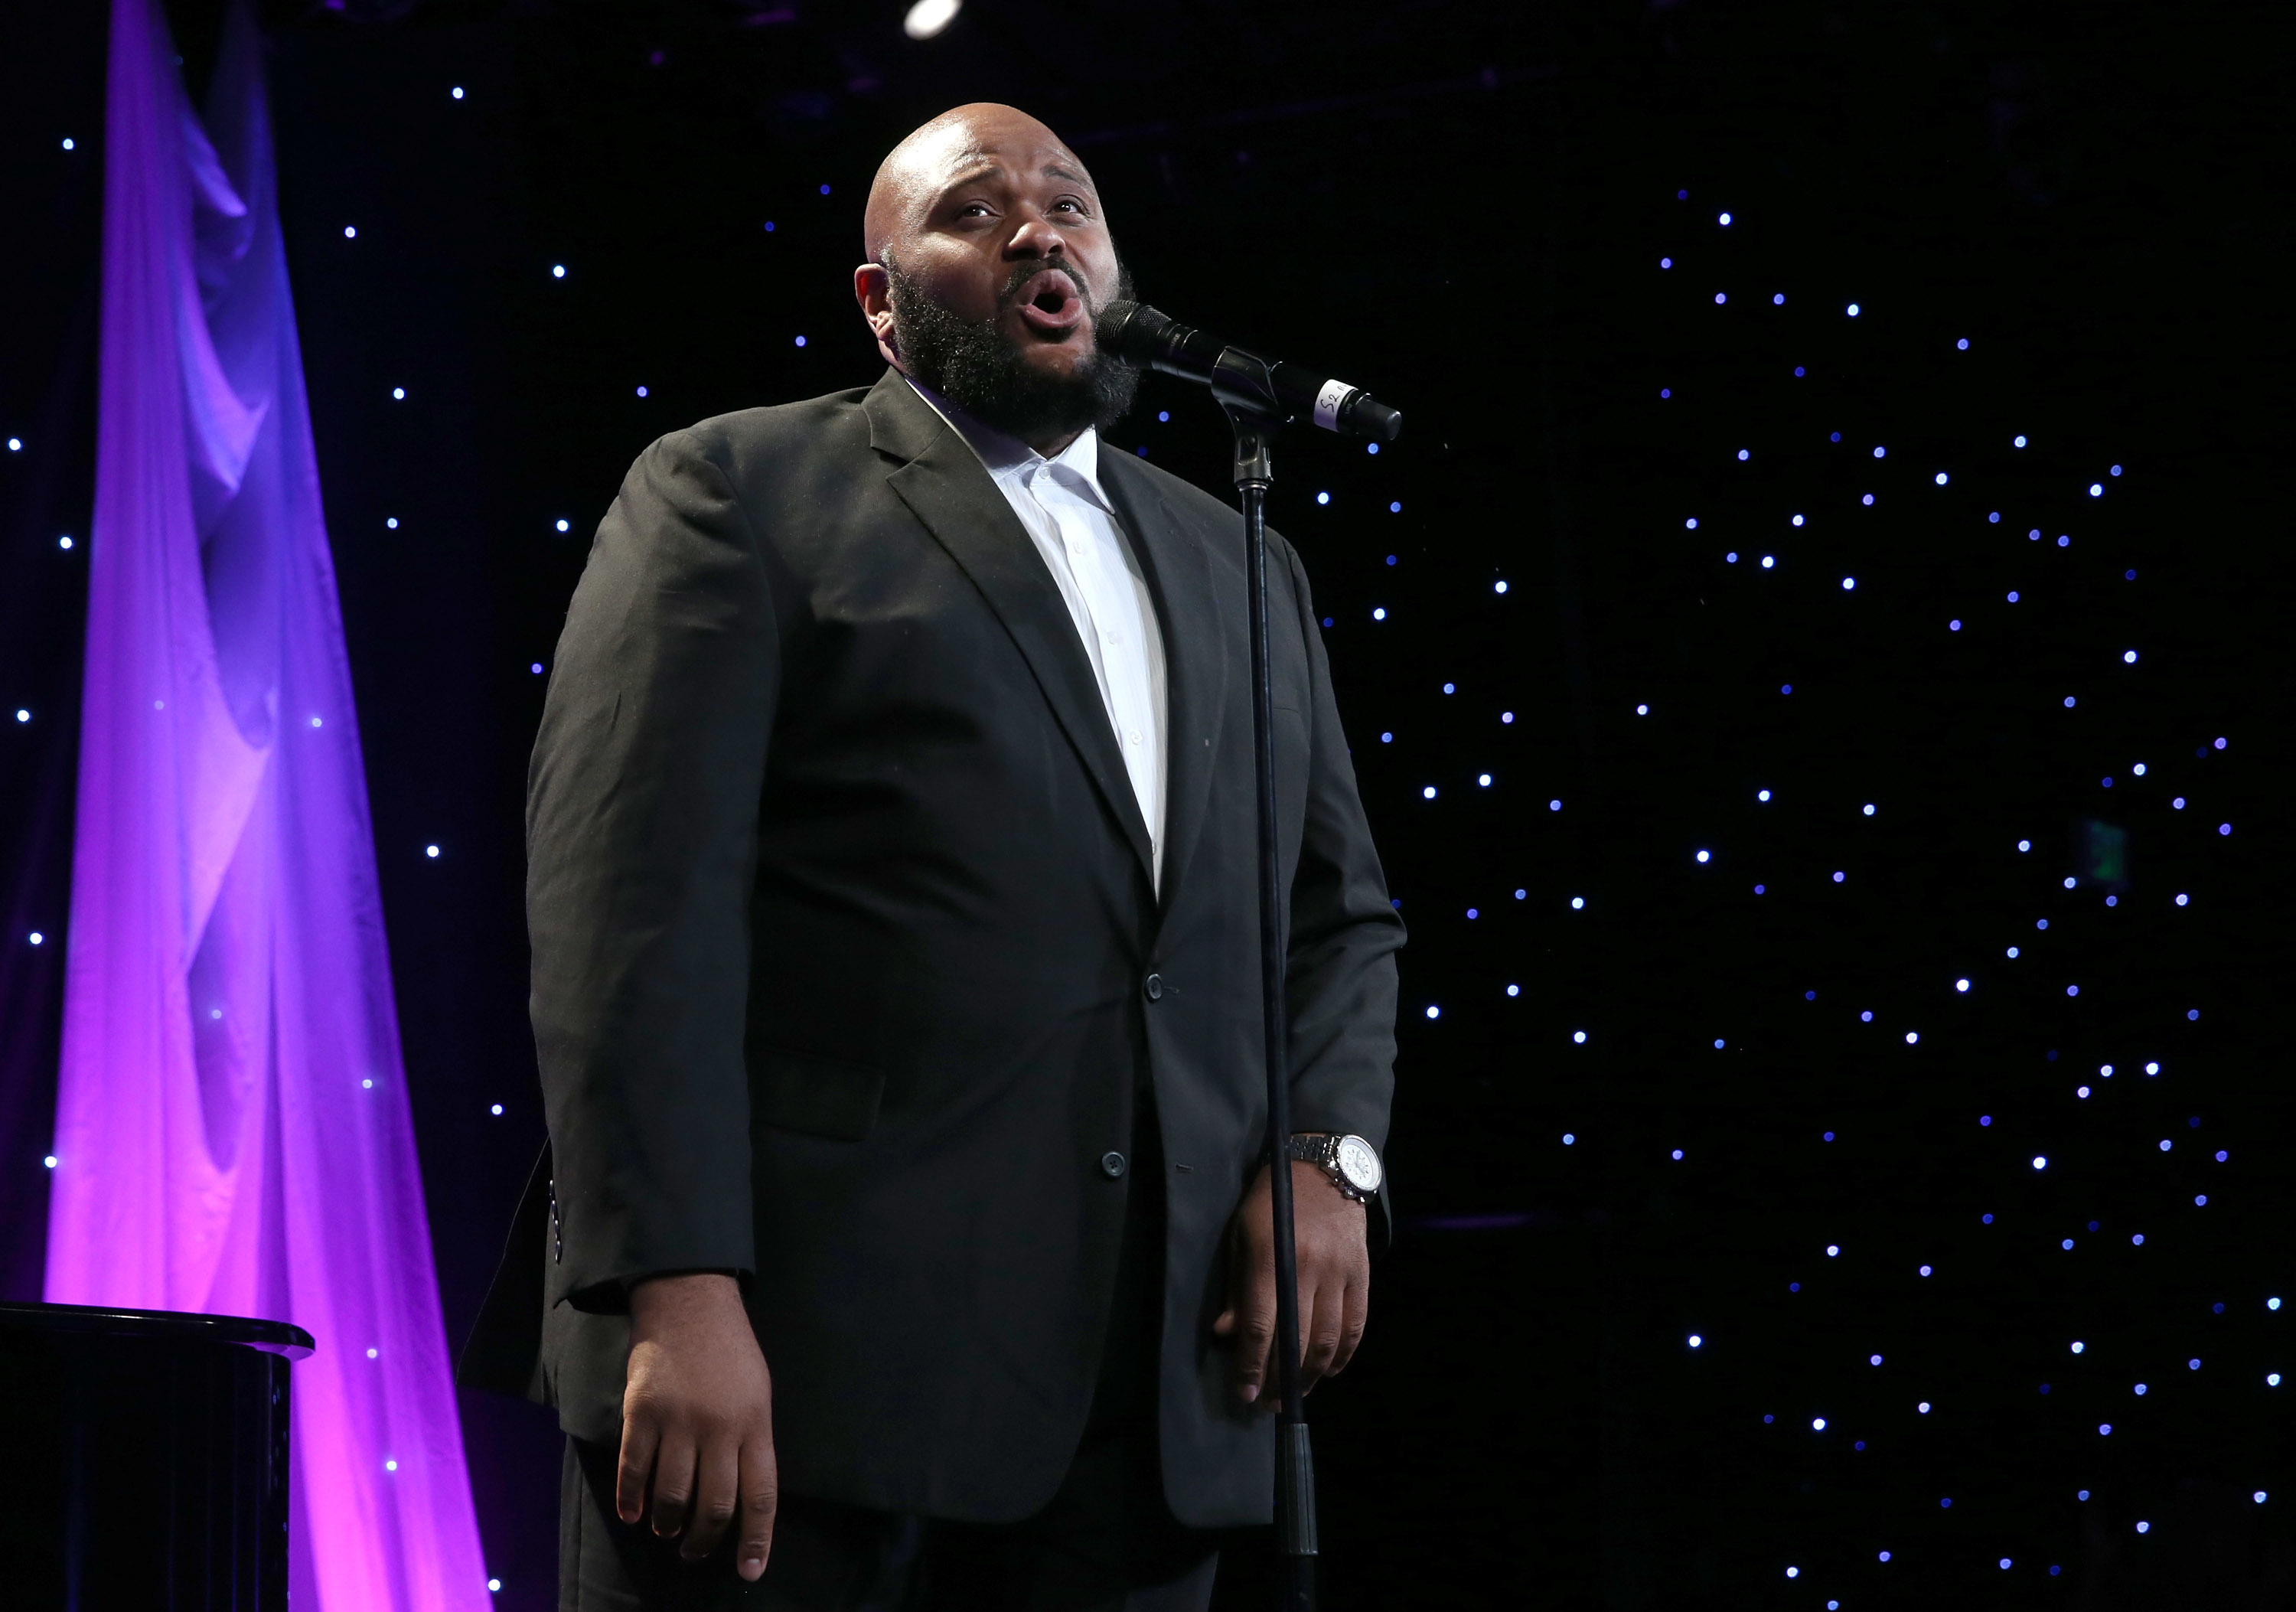 American Idol Season 2 winner, Ruben Studdard, was a guest vocalist with David Foster at Augie’s Quest Tradition of Hope gala at the Beverly Hilton Hotel on October 10, 2015. Photo credit Steve Cohn.